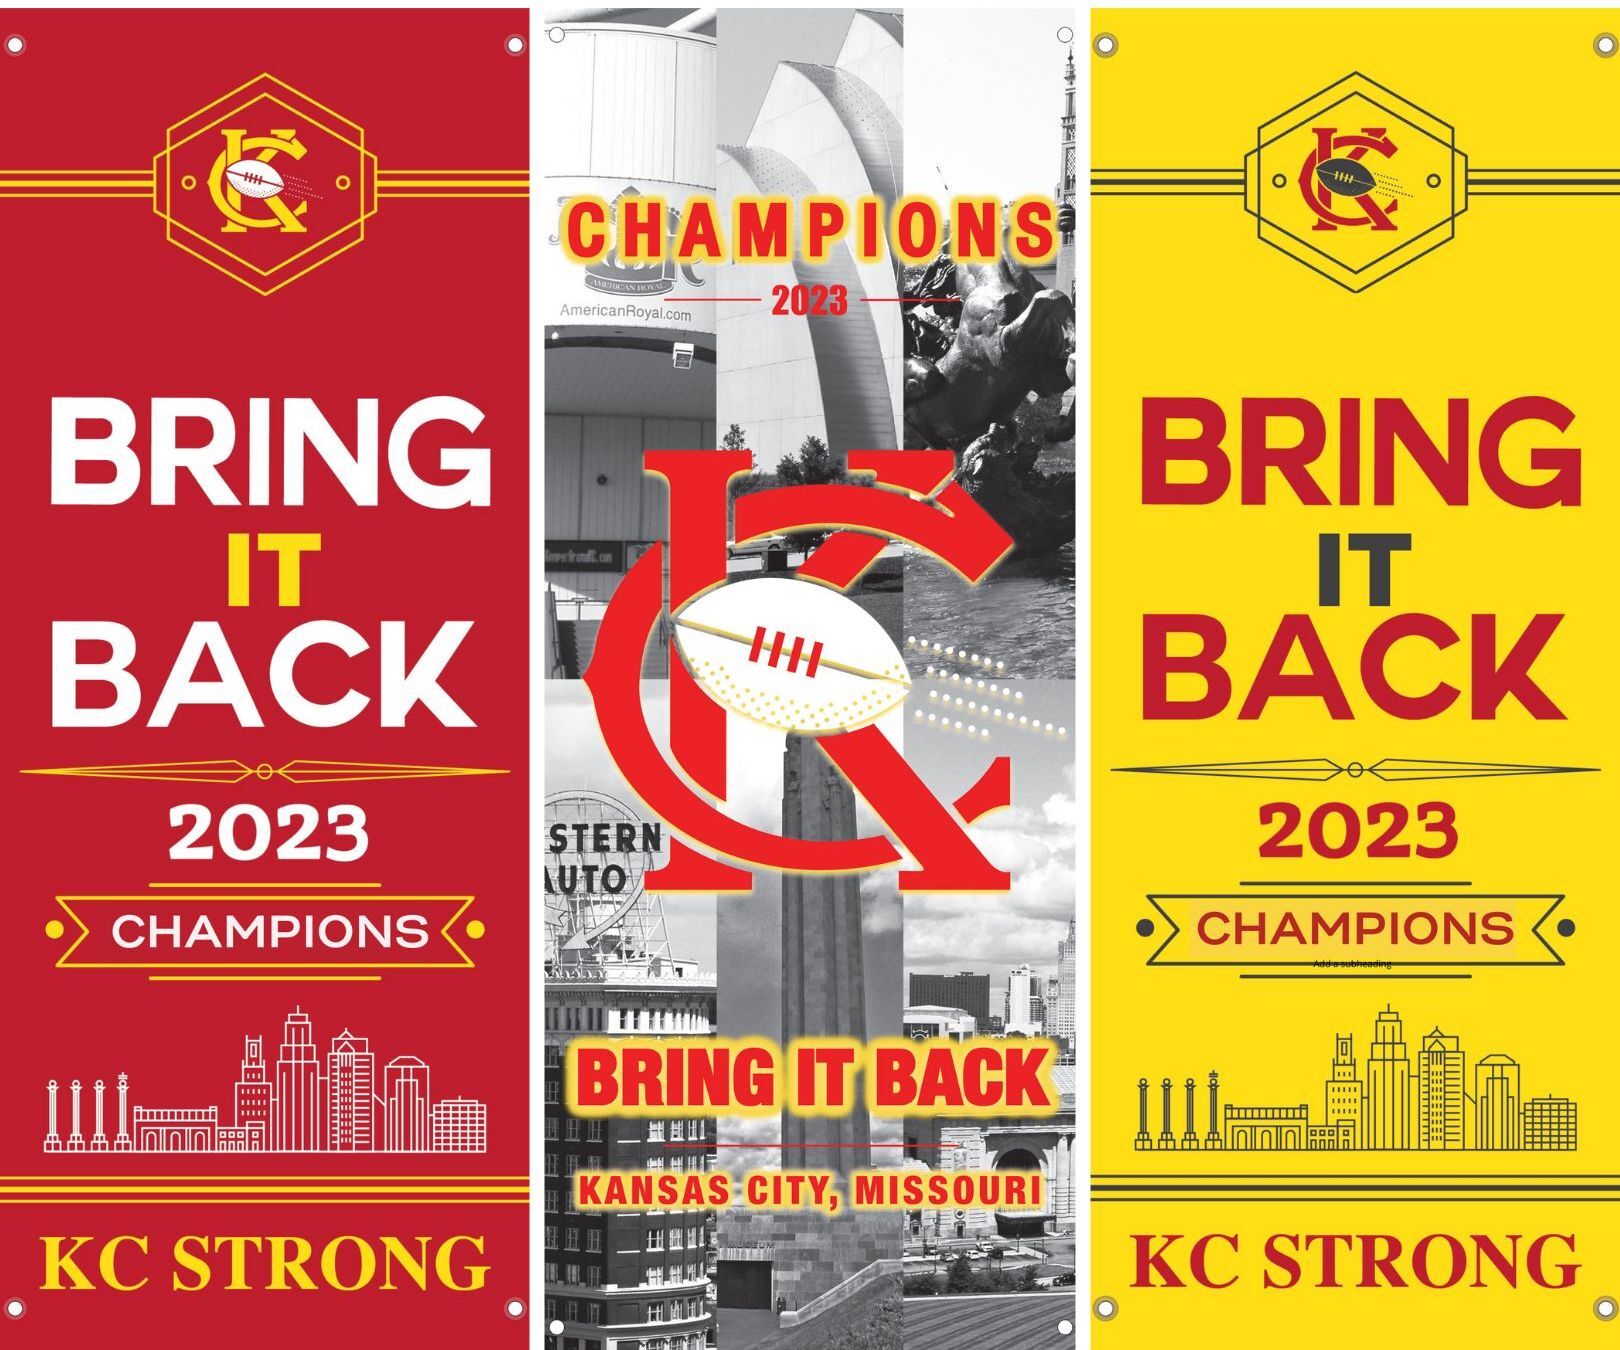 15"x36" ALL 3 CHAMPIONS "BRING IT BACK"  Banners